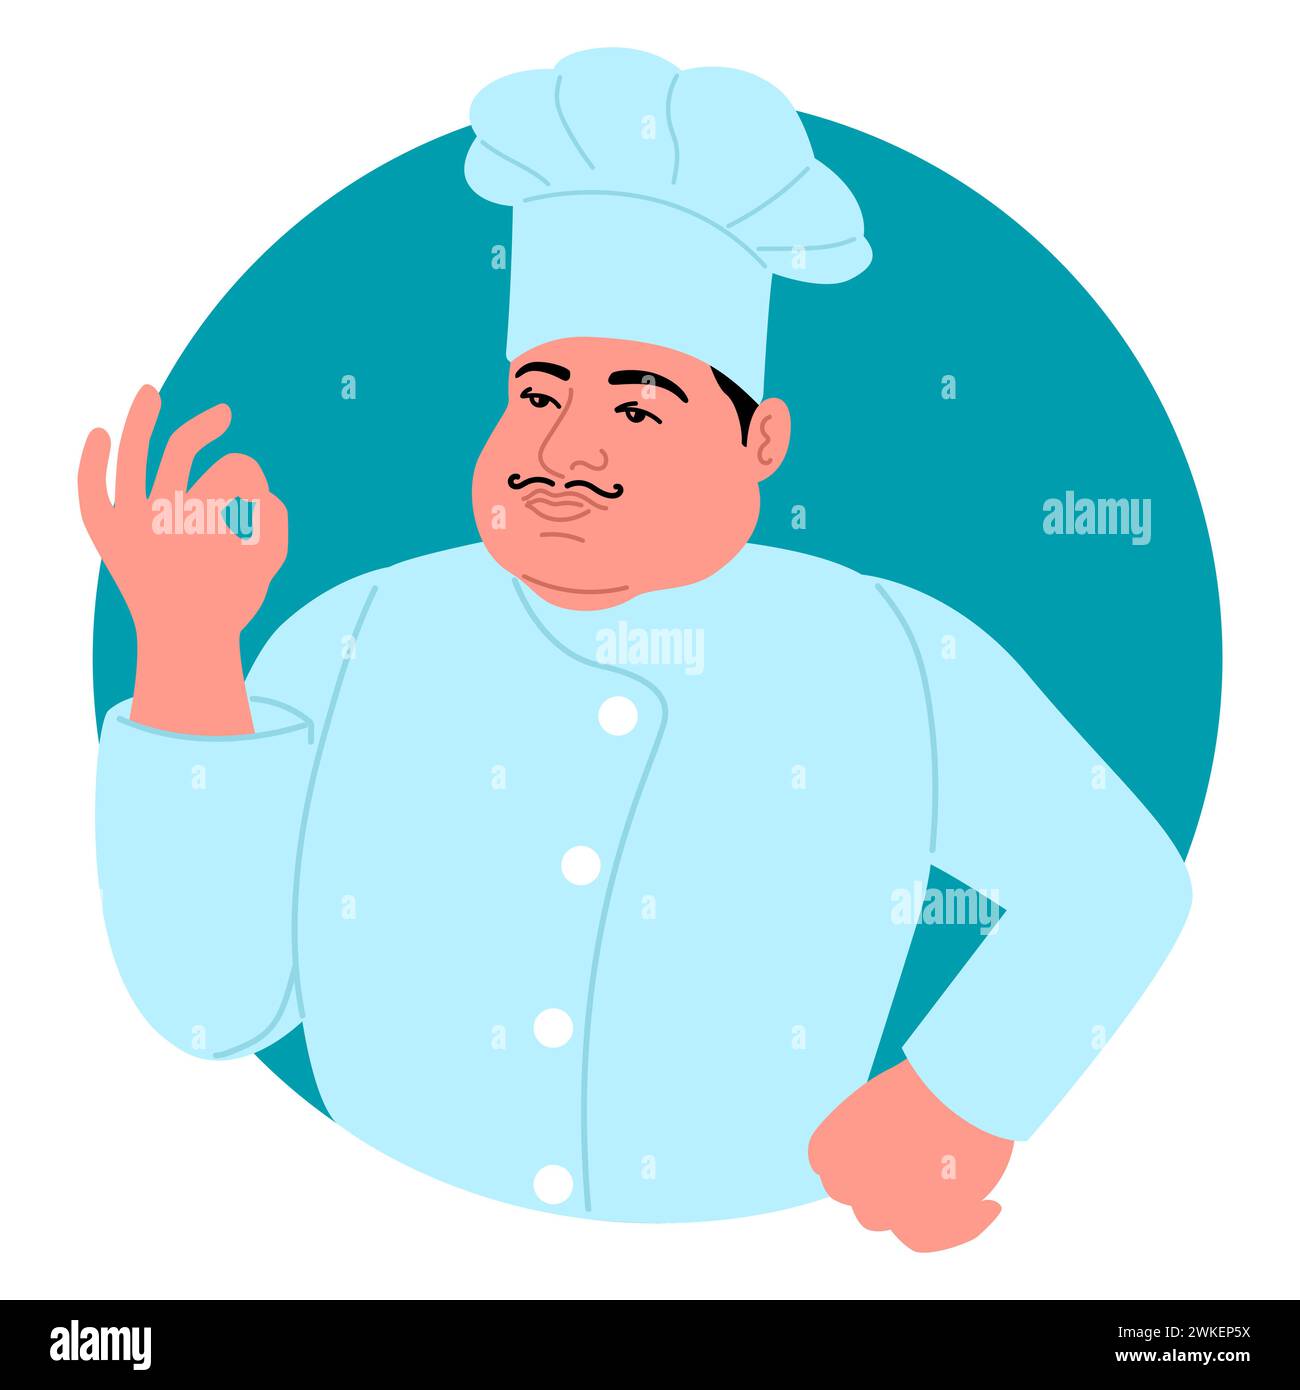 Clip art of a chef making a perfect hand gesture, ideal for restaurant menus, cooking blogs, and food-related designs. Chefs gesture symbolize culinar Stock Vector